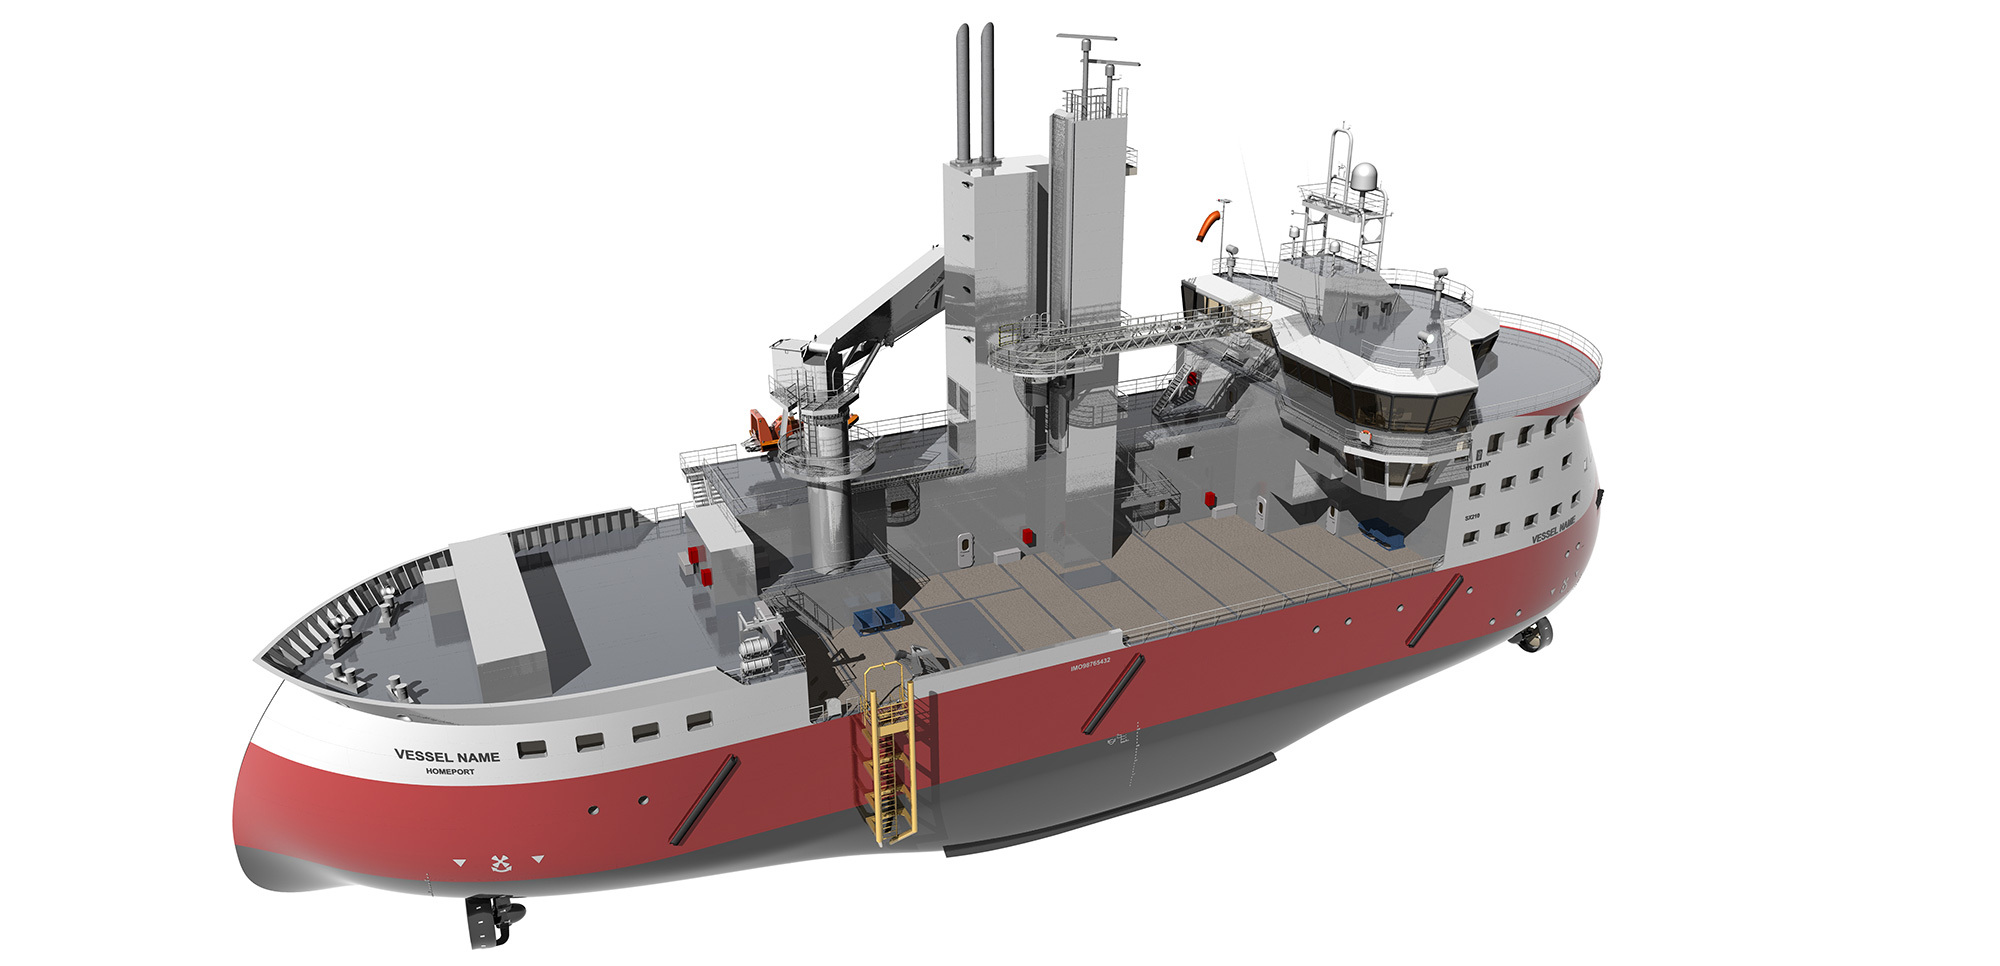 Ulstein’s SX210 design for service and maintenance of offshore wind turbines incorporates the TWIN X-STERN™ hull design.